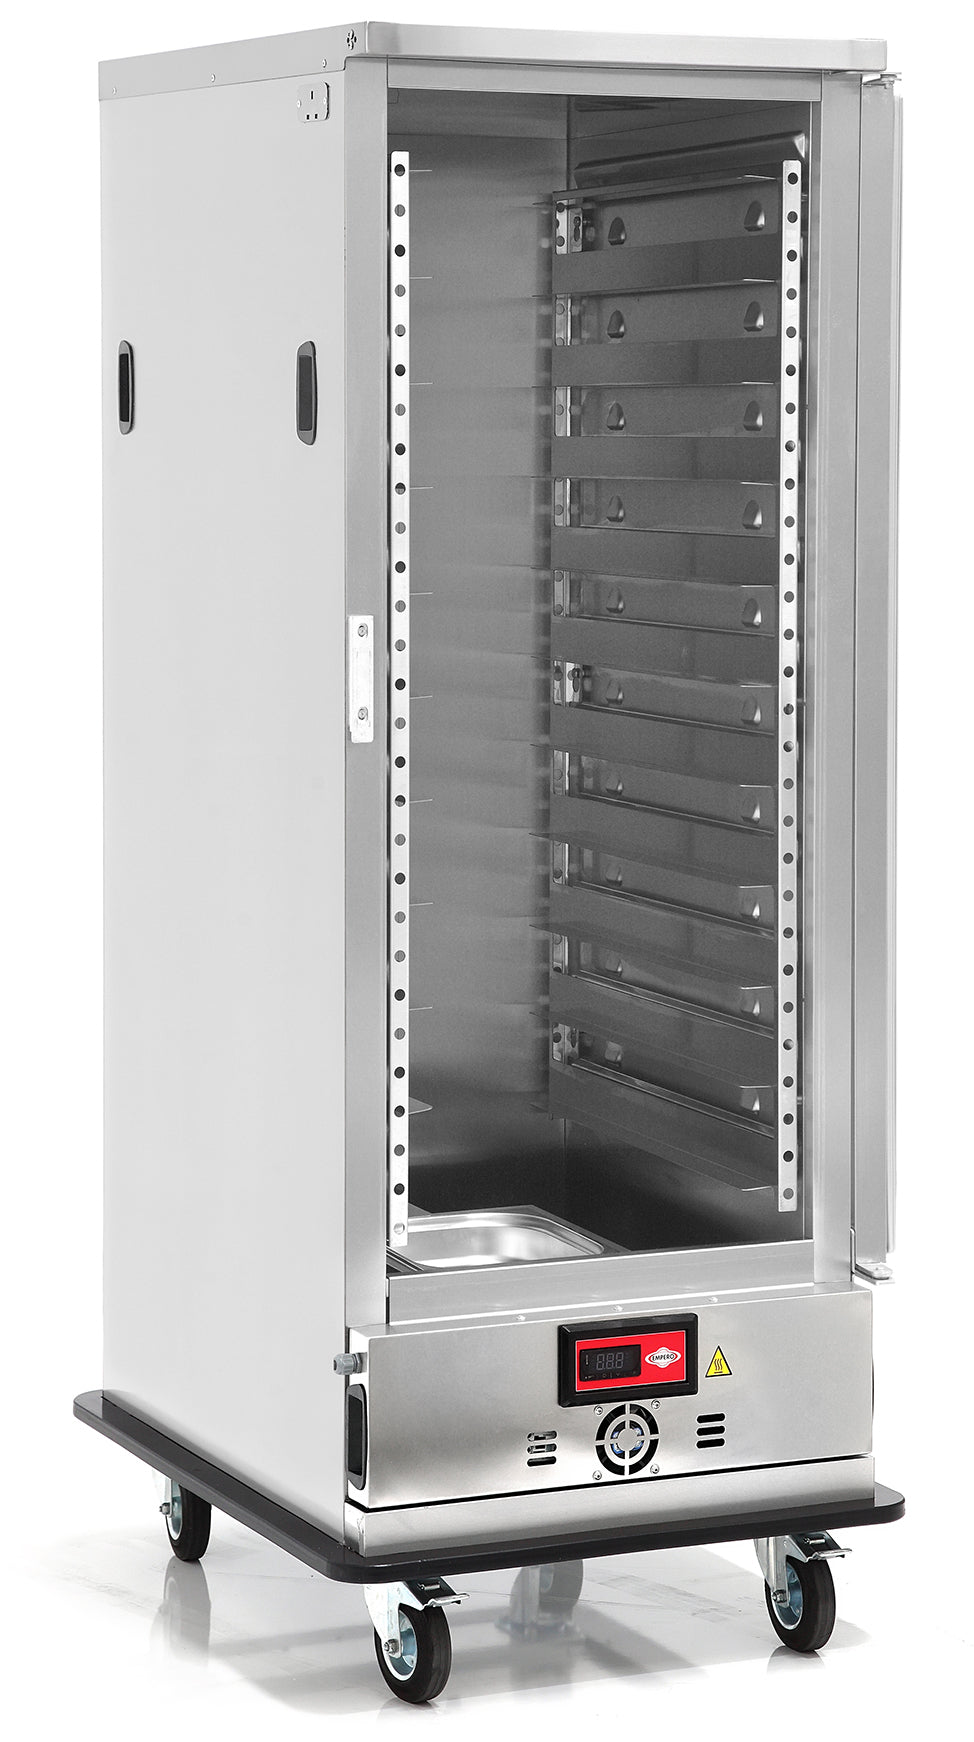 Polaris HC-11 Stainless Steel Full Size Insulated Heated Holding Cabinet with Solid Door, 22 GN1/1 Capacity, 11 Sheet pan capacity